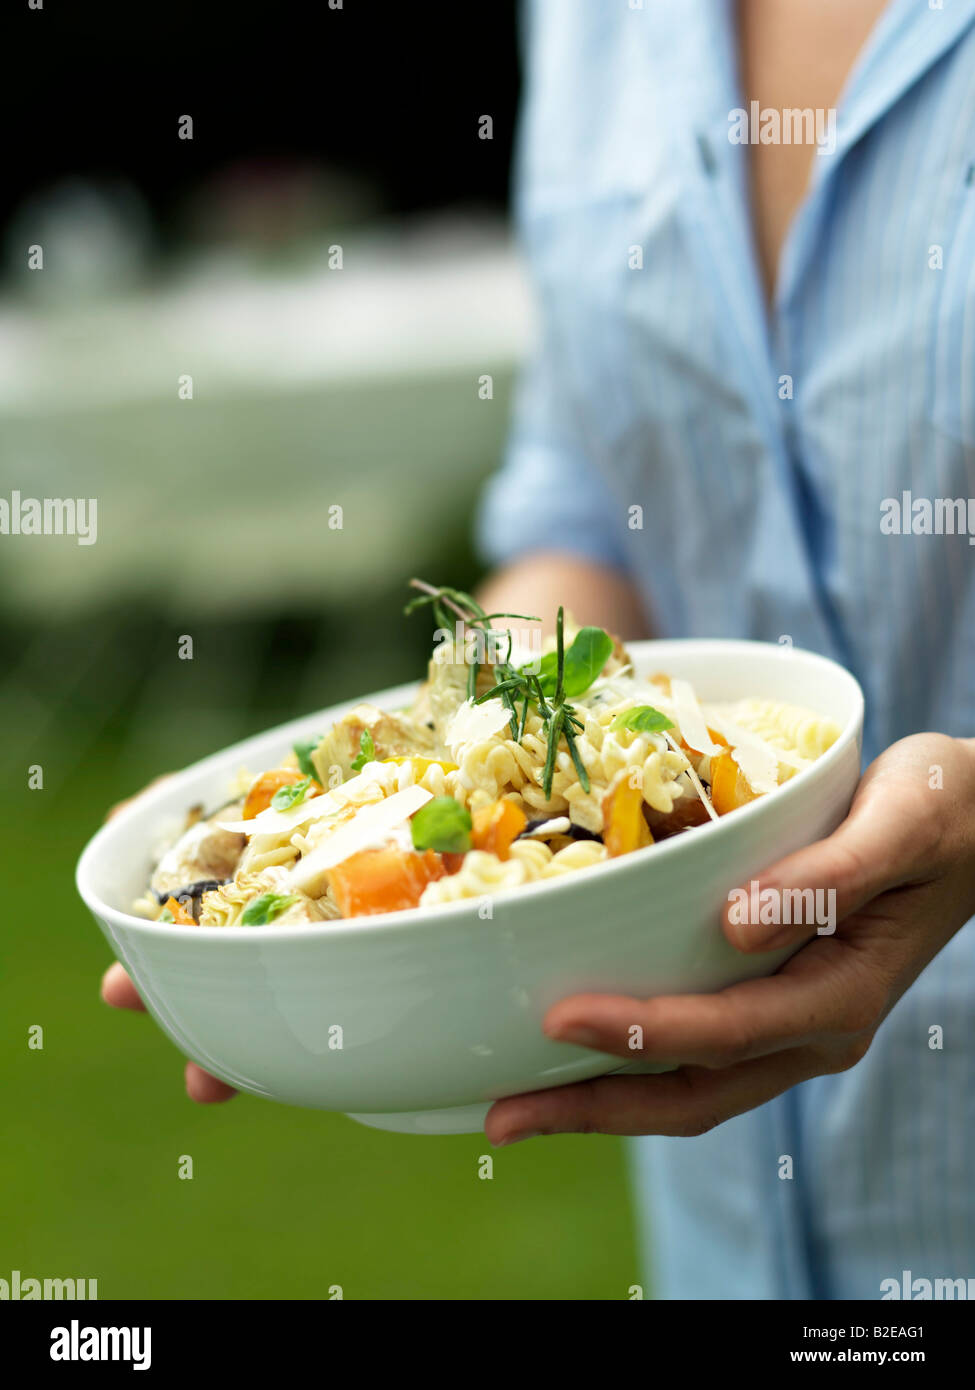 Mid section view of woman holding bowl of pasta salad Stock Photo